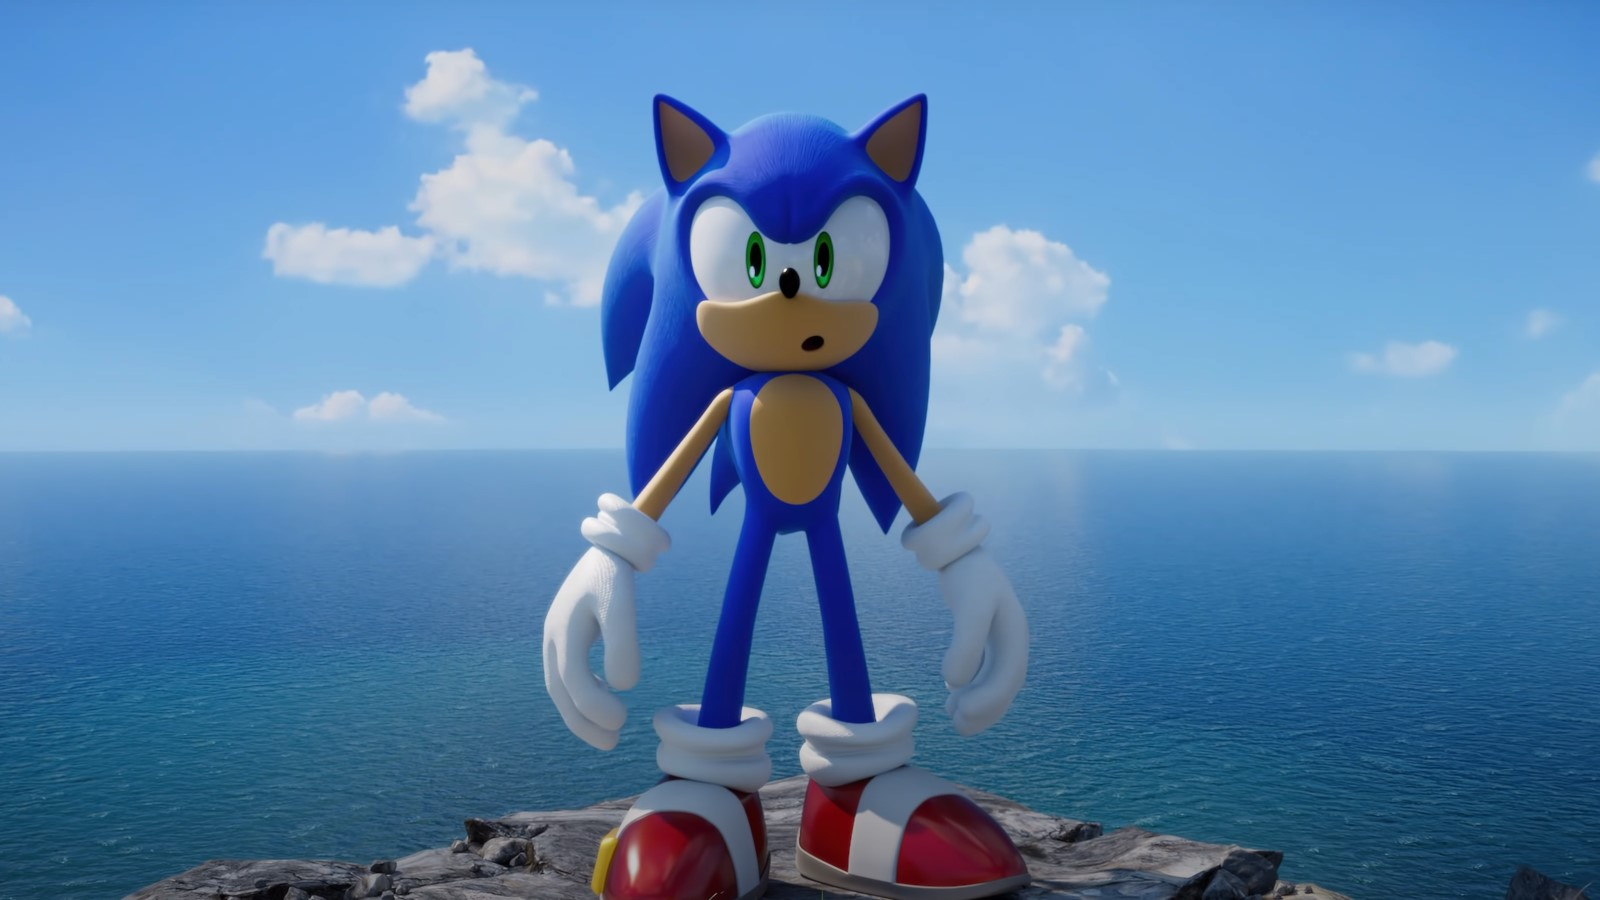 Comical Sonic Mania mod adds Knuckles and Knuckles and Knuckles